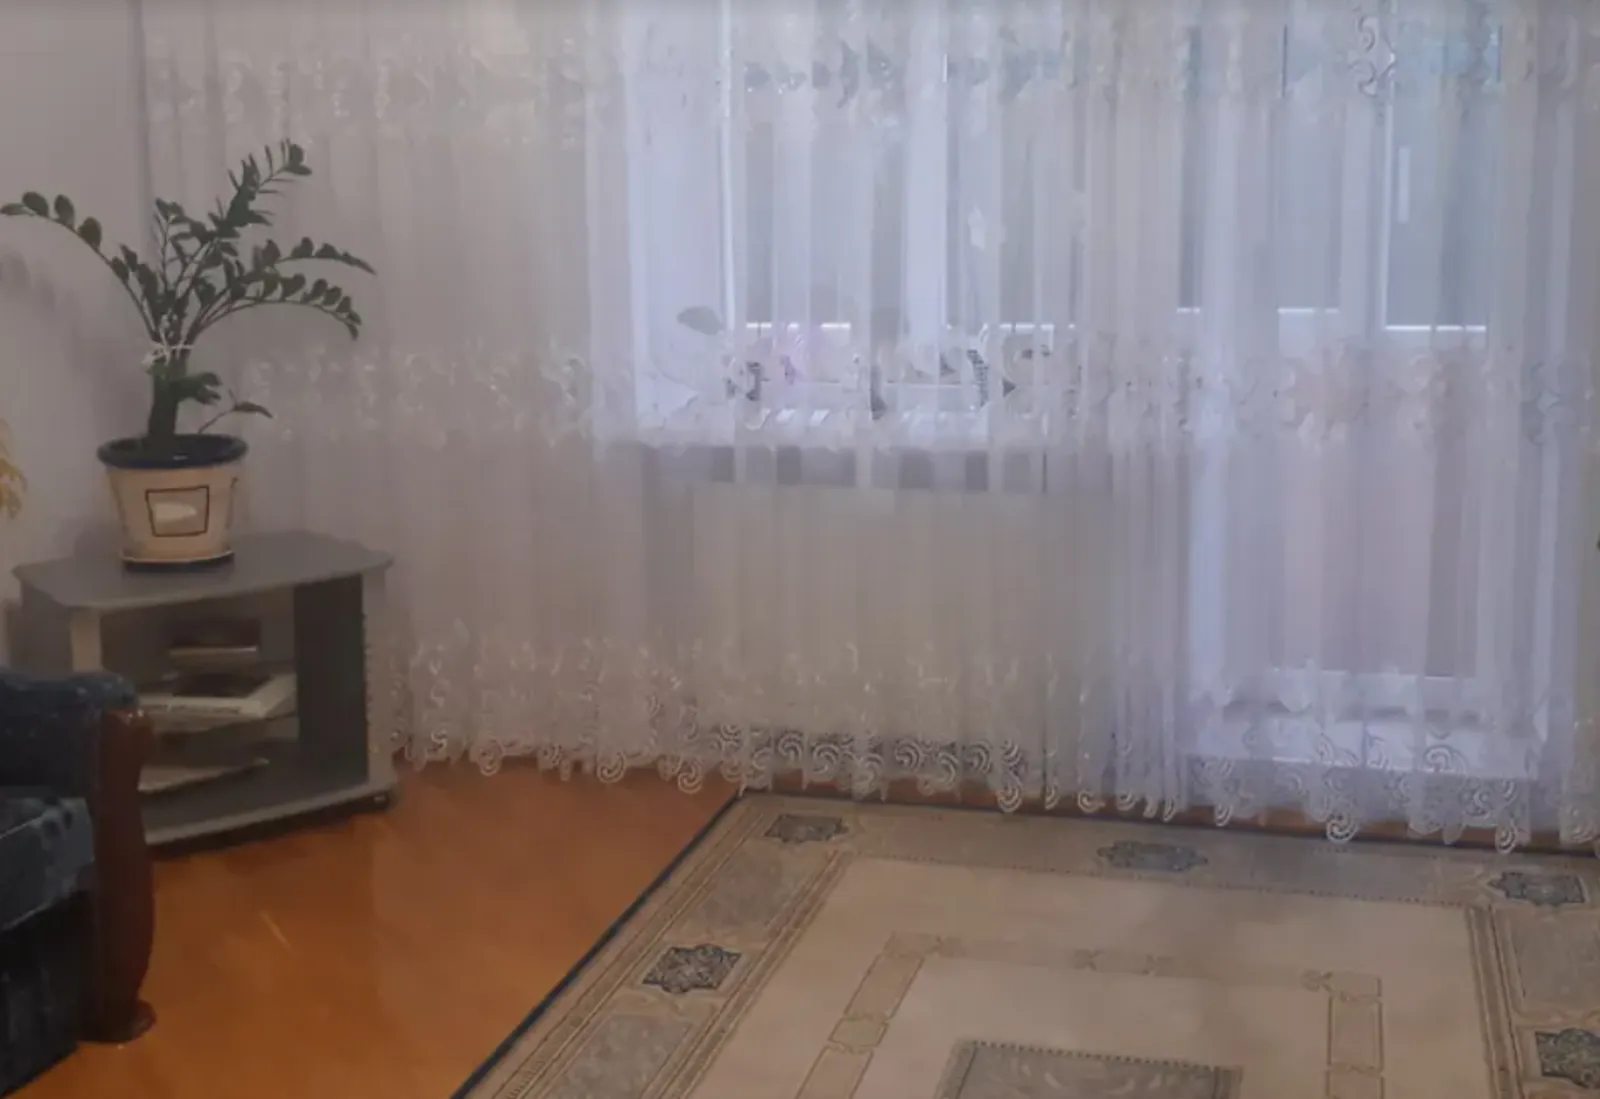 Apartments for sale. 4 rooms, 75 m², 2nd floor/9 floors. Bam, Ternopil. 